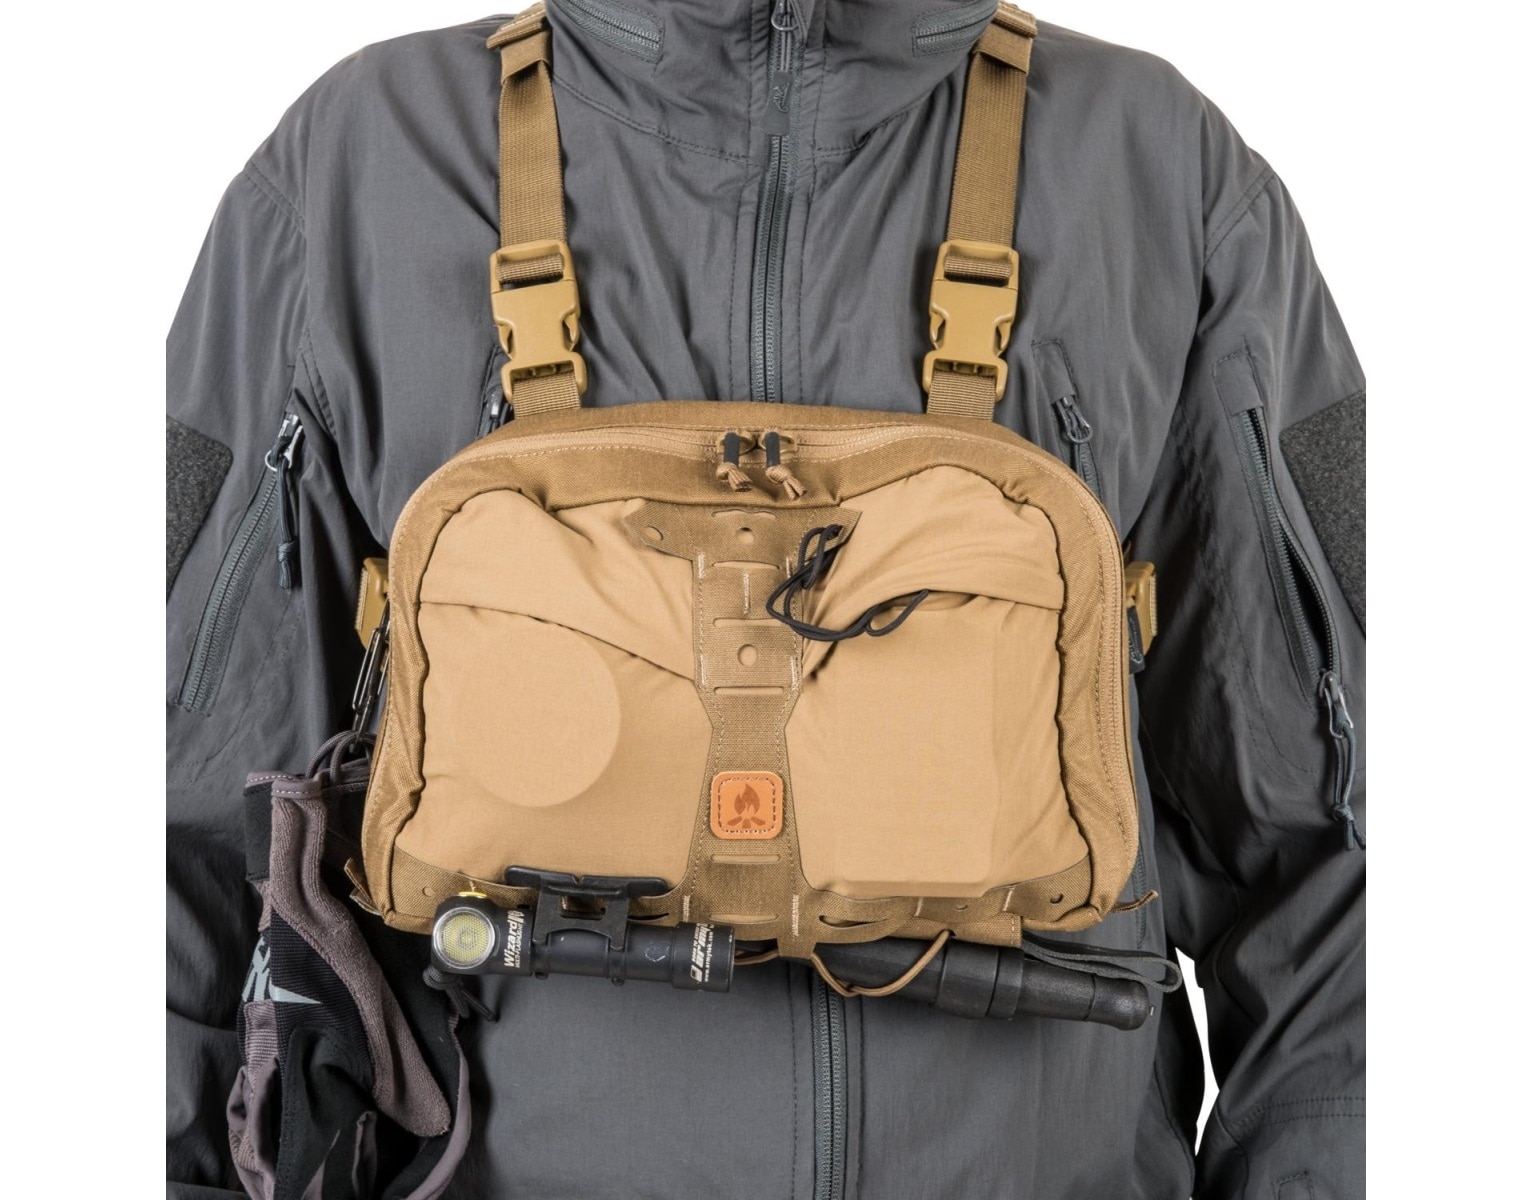 Torba Helikon Chest Pack Numbat Earth Brown/Clay (TB-NMB-CD-0A0BB)